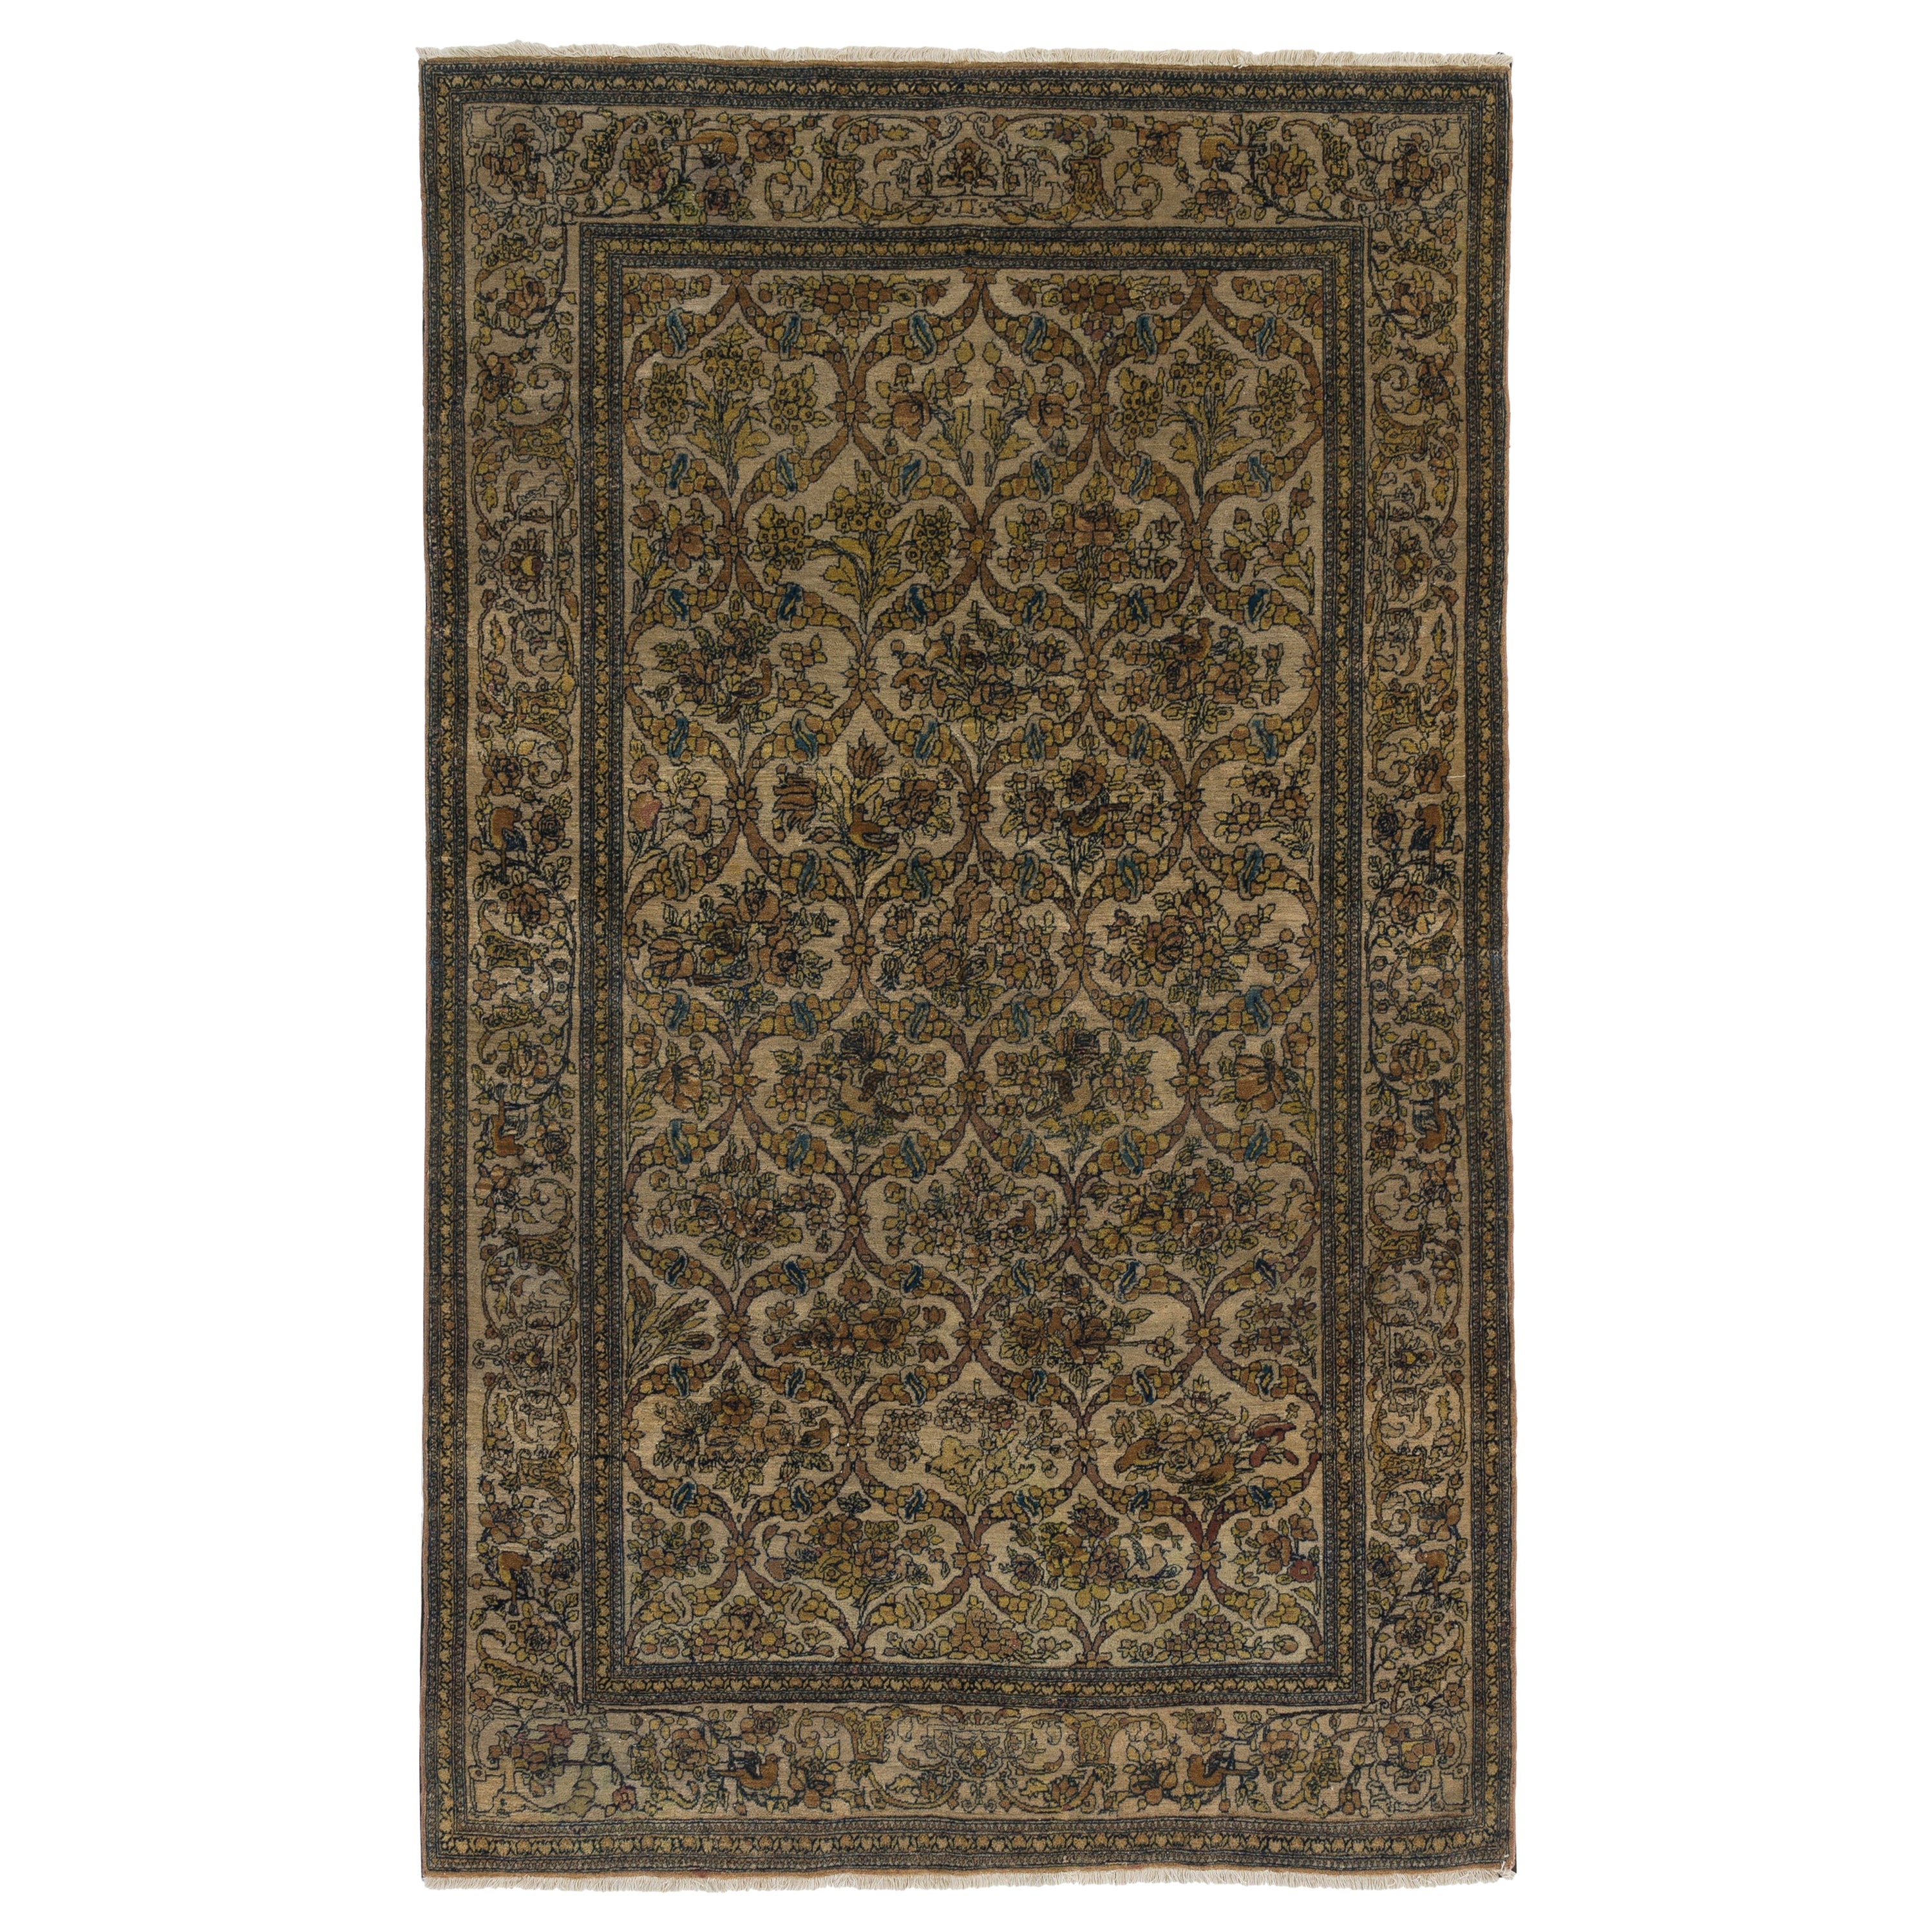 Antique Hand Knotted Turkish Rug, circa 1920